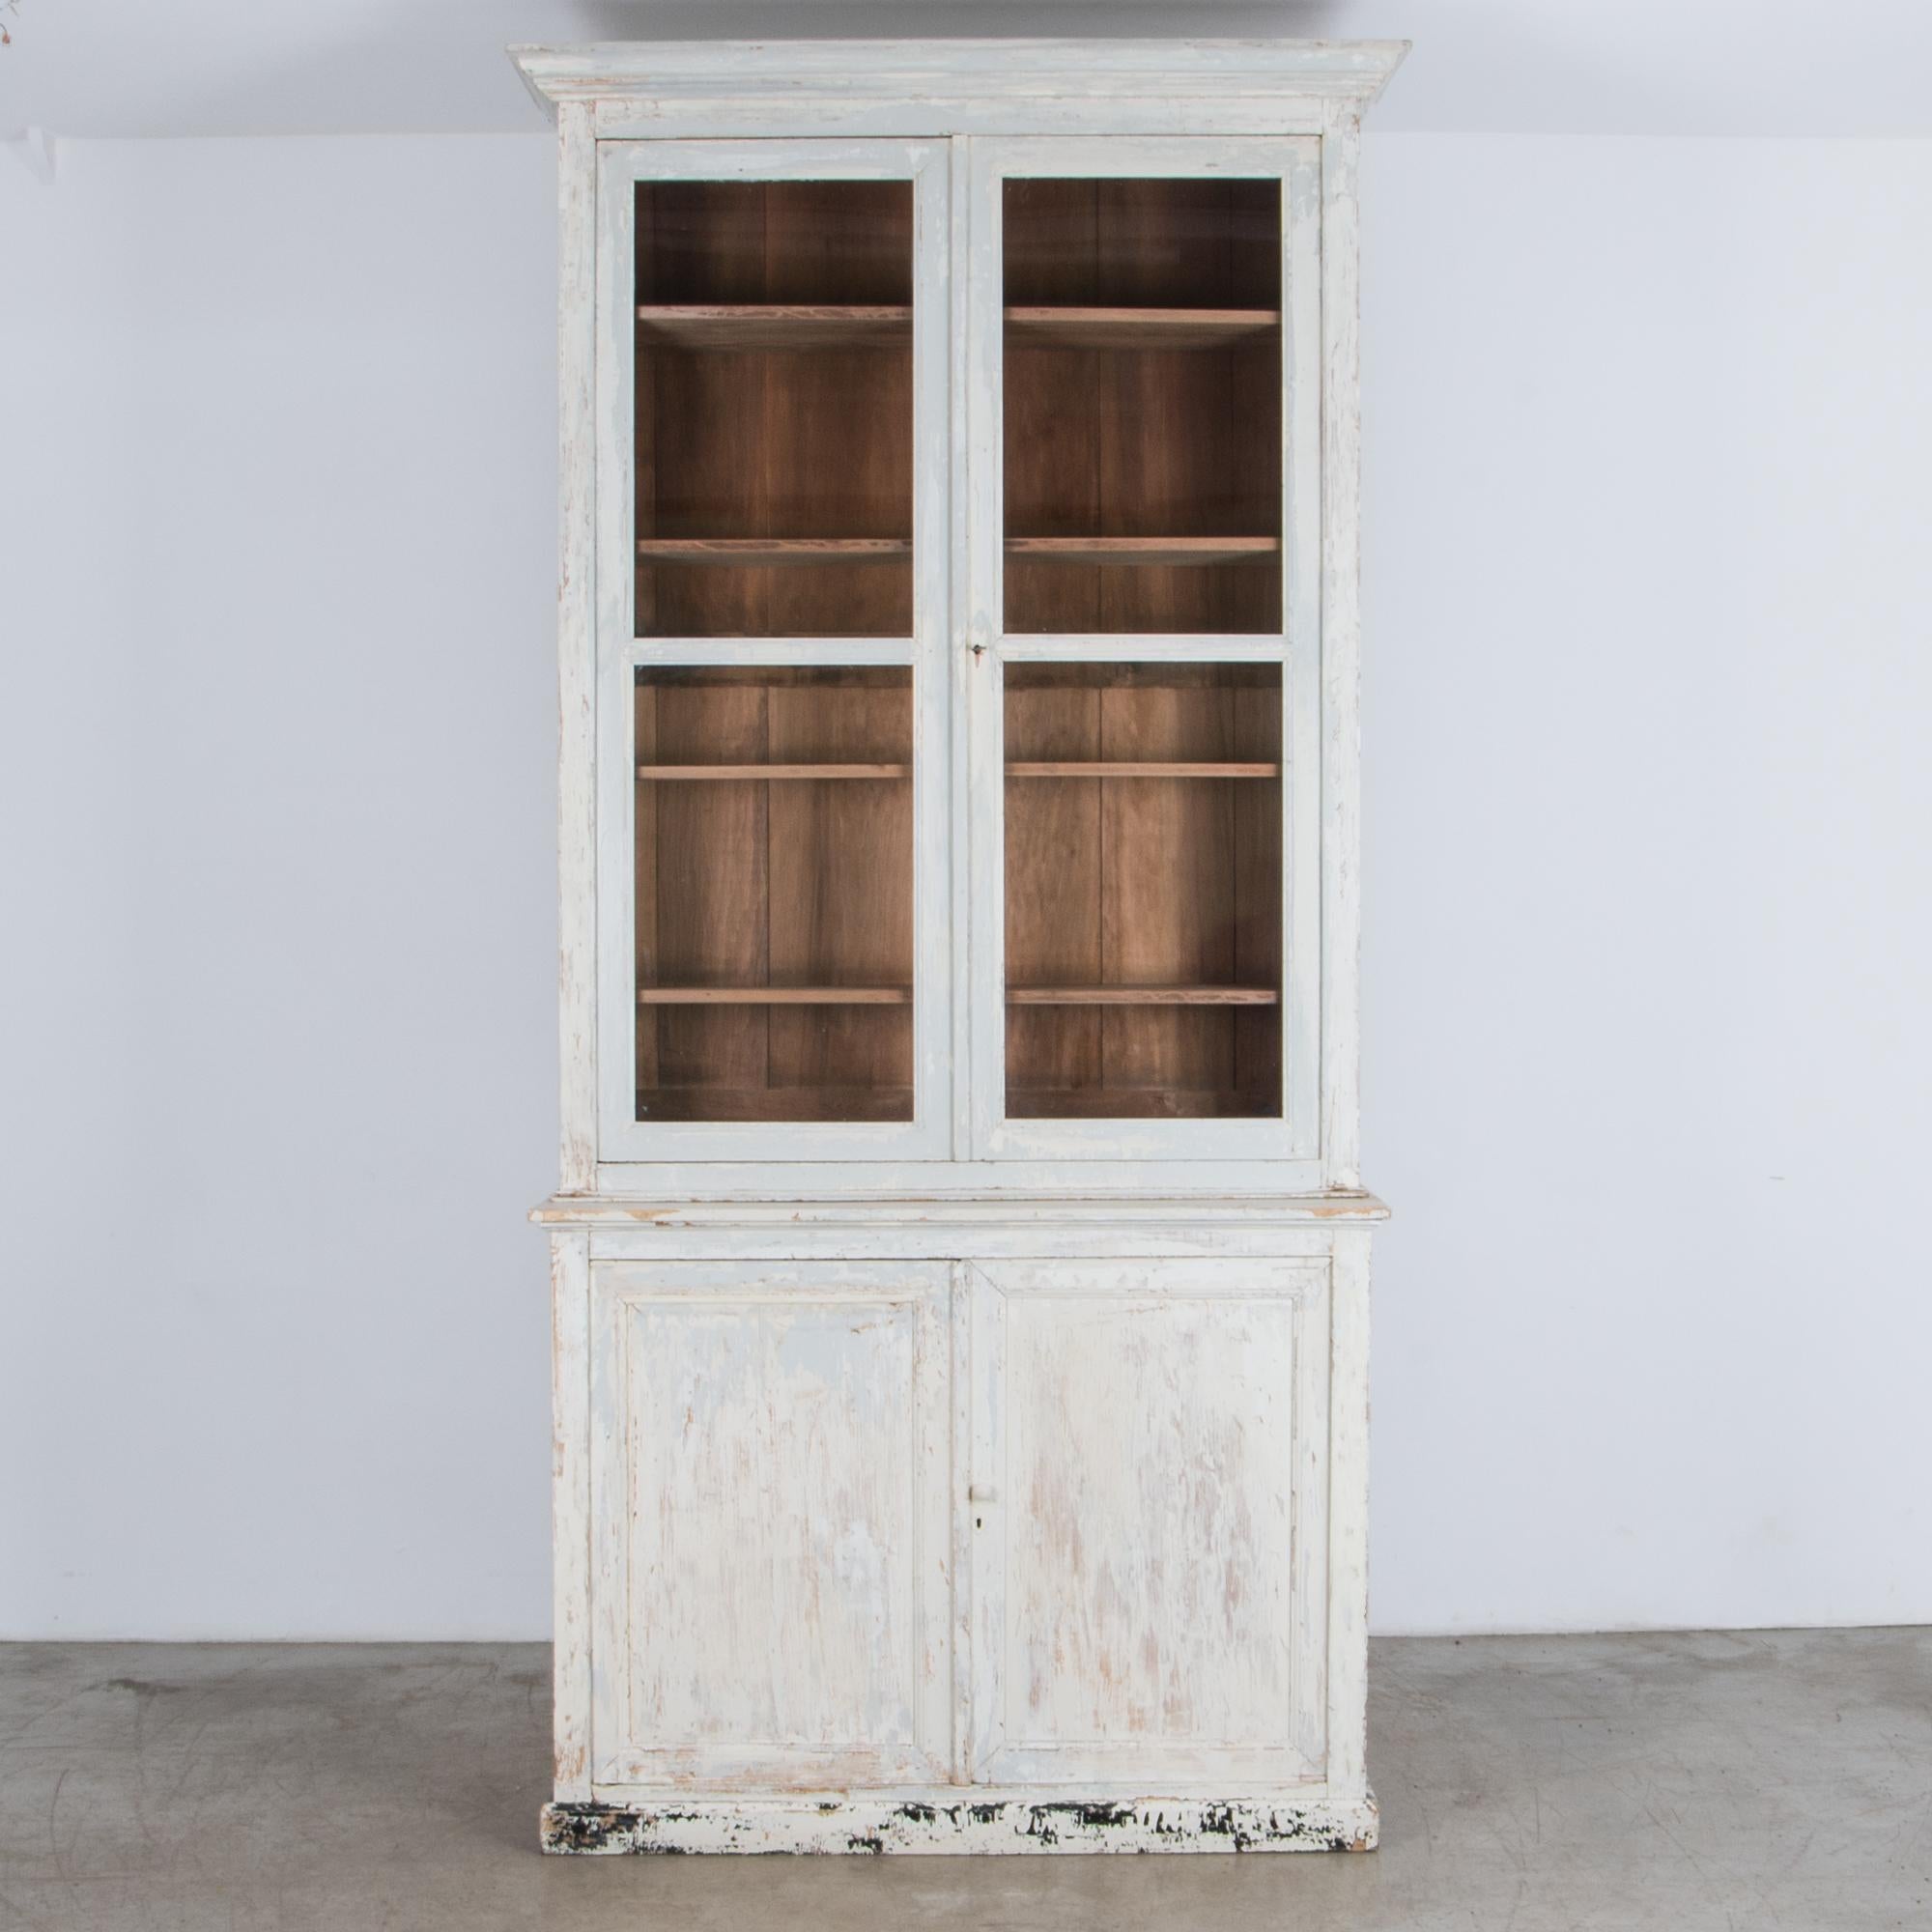 Two lower doors and glass display windows give this piece potential for storage or display. From France, circa 1900, a simple geometric shape recalls a countryside local in a pale cool white, gently distressed. Distinctive period design is